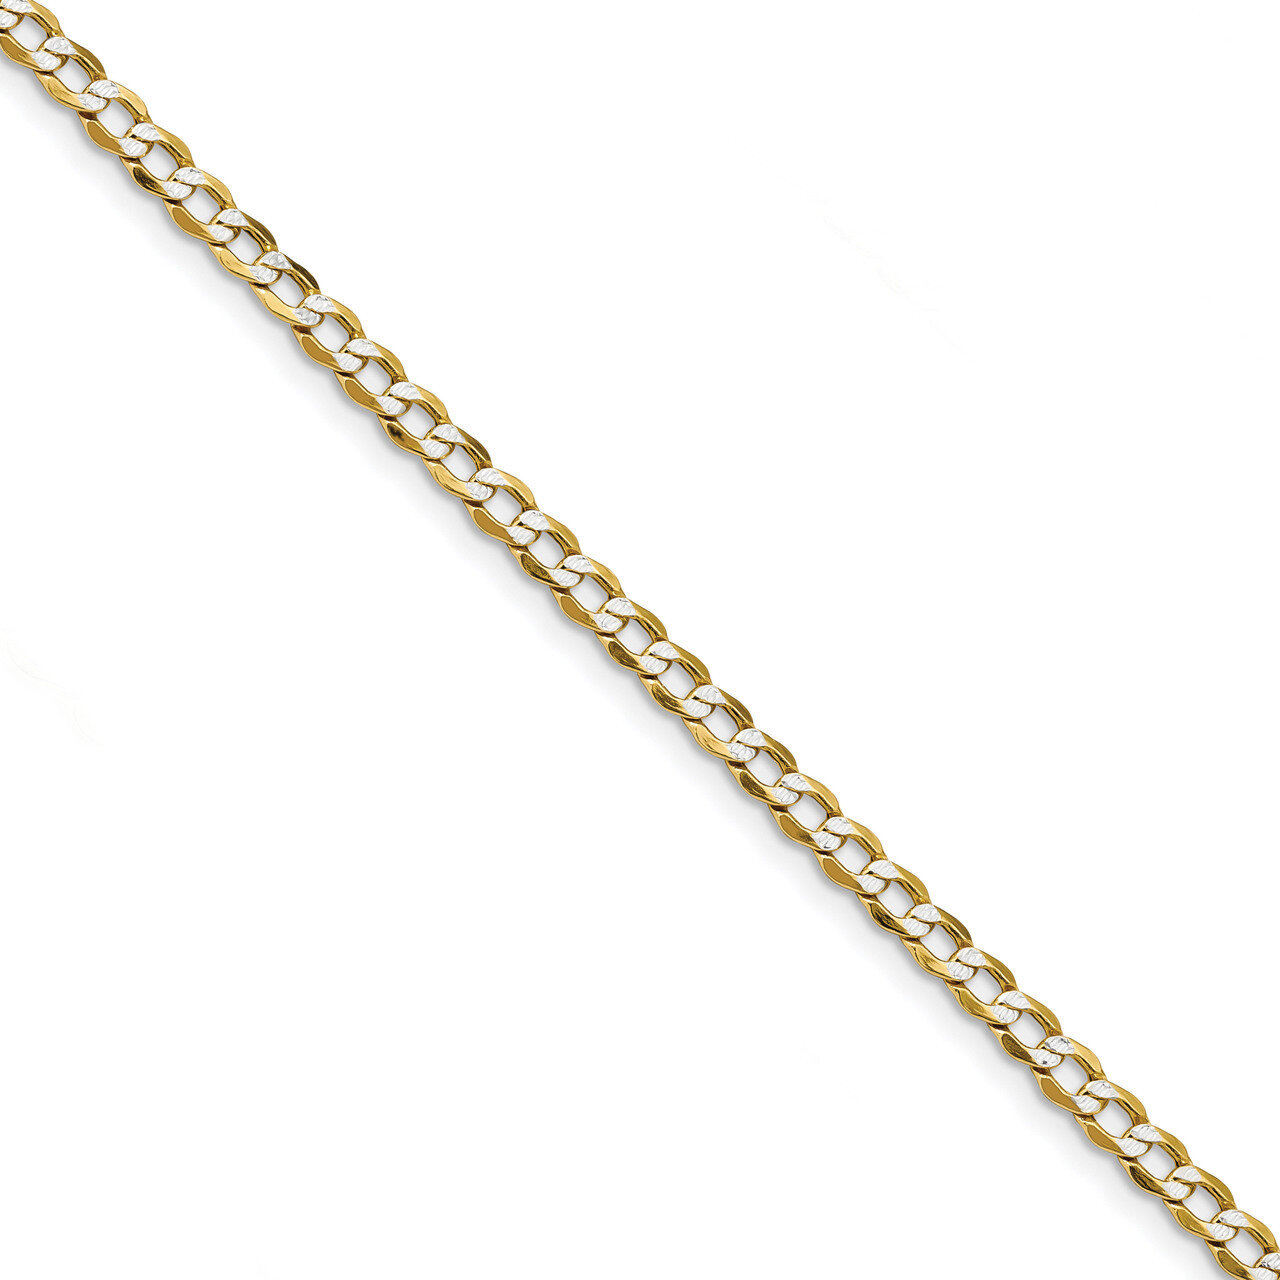 7 Inch 4.3mm Semi-solid Pave Curb Chain 14k Gold & Rhodium PWF100-7